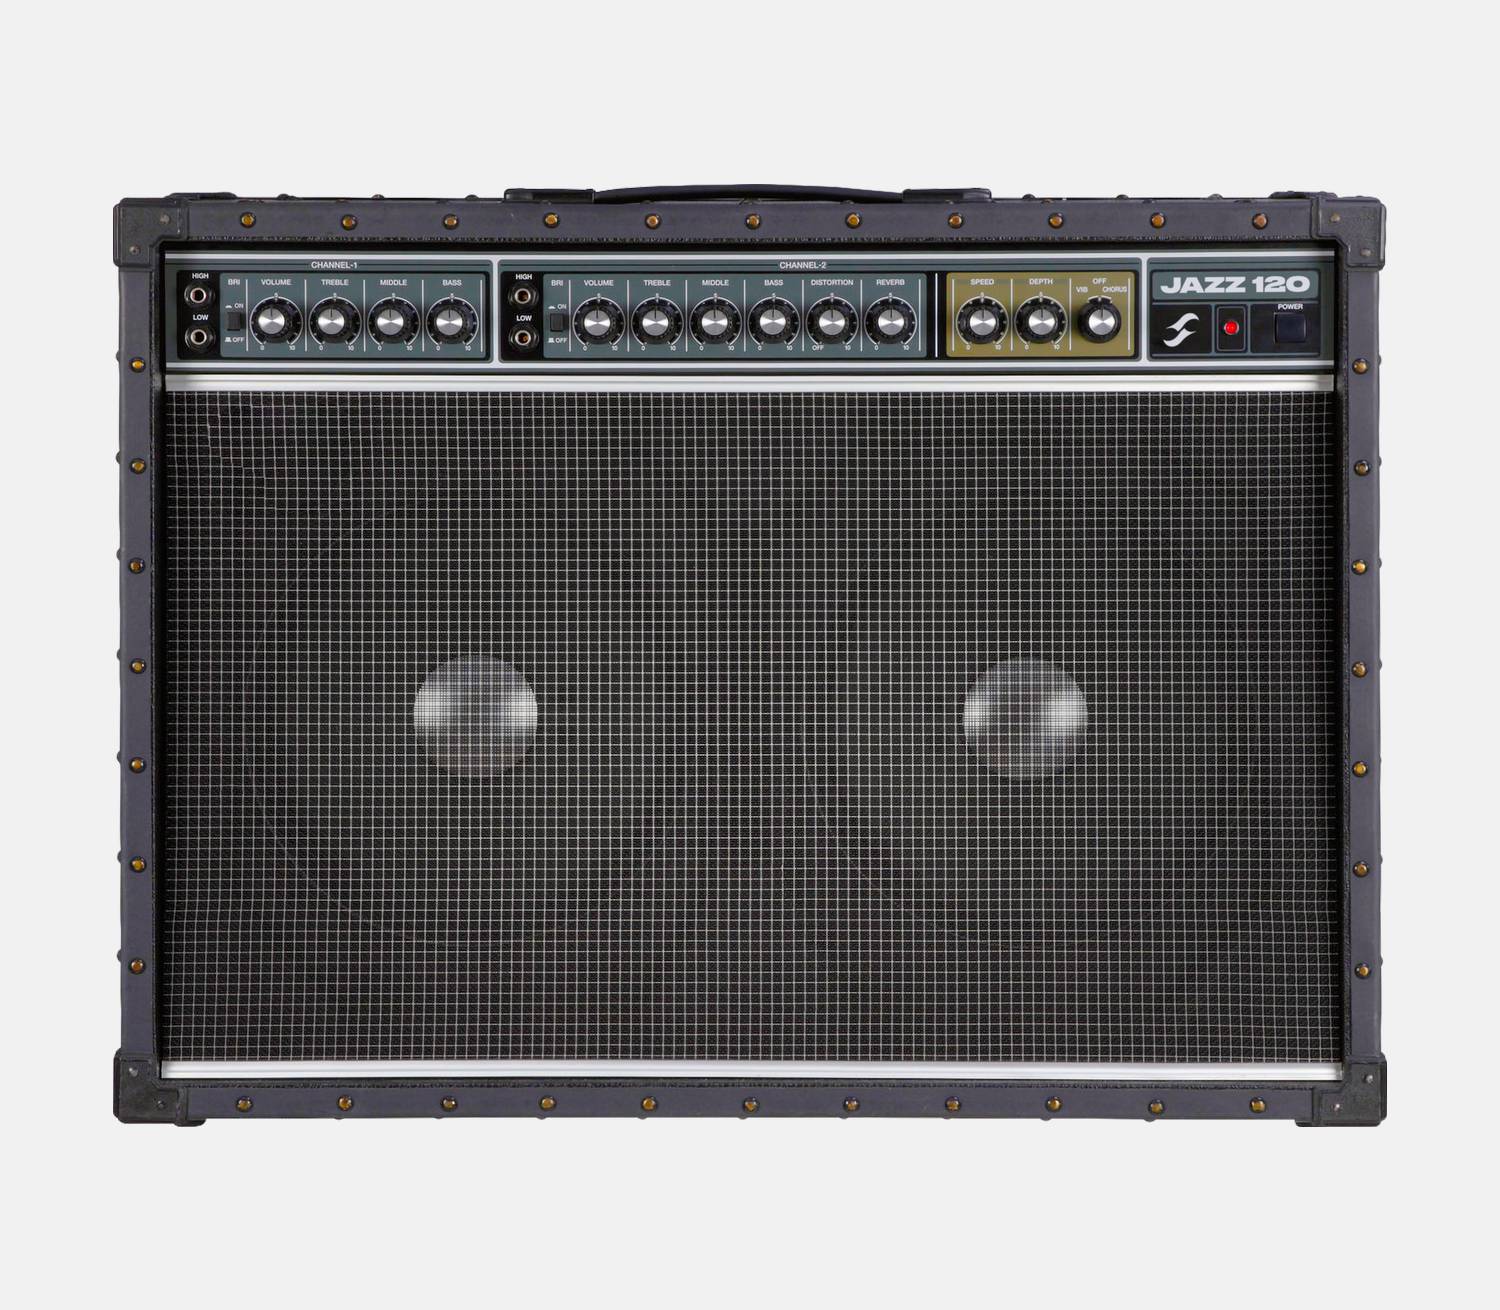 Jazz 120 Dynamic IR Cabinet - Two notes